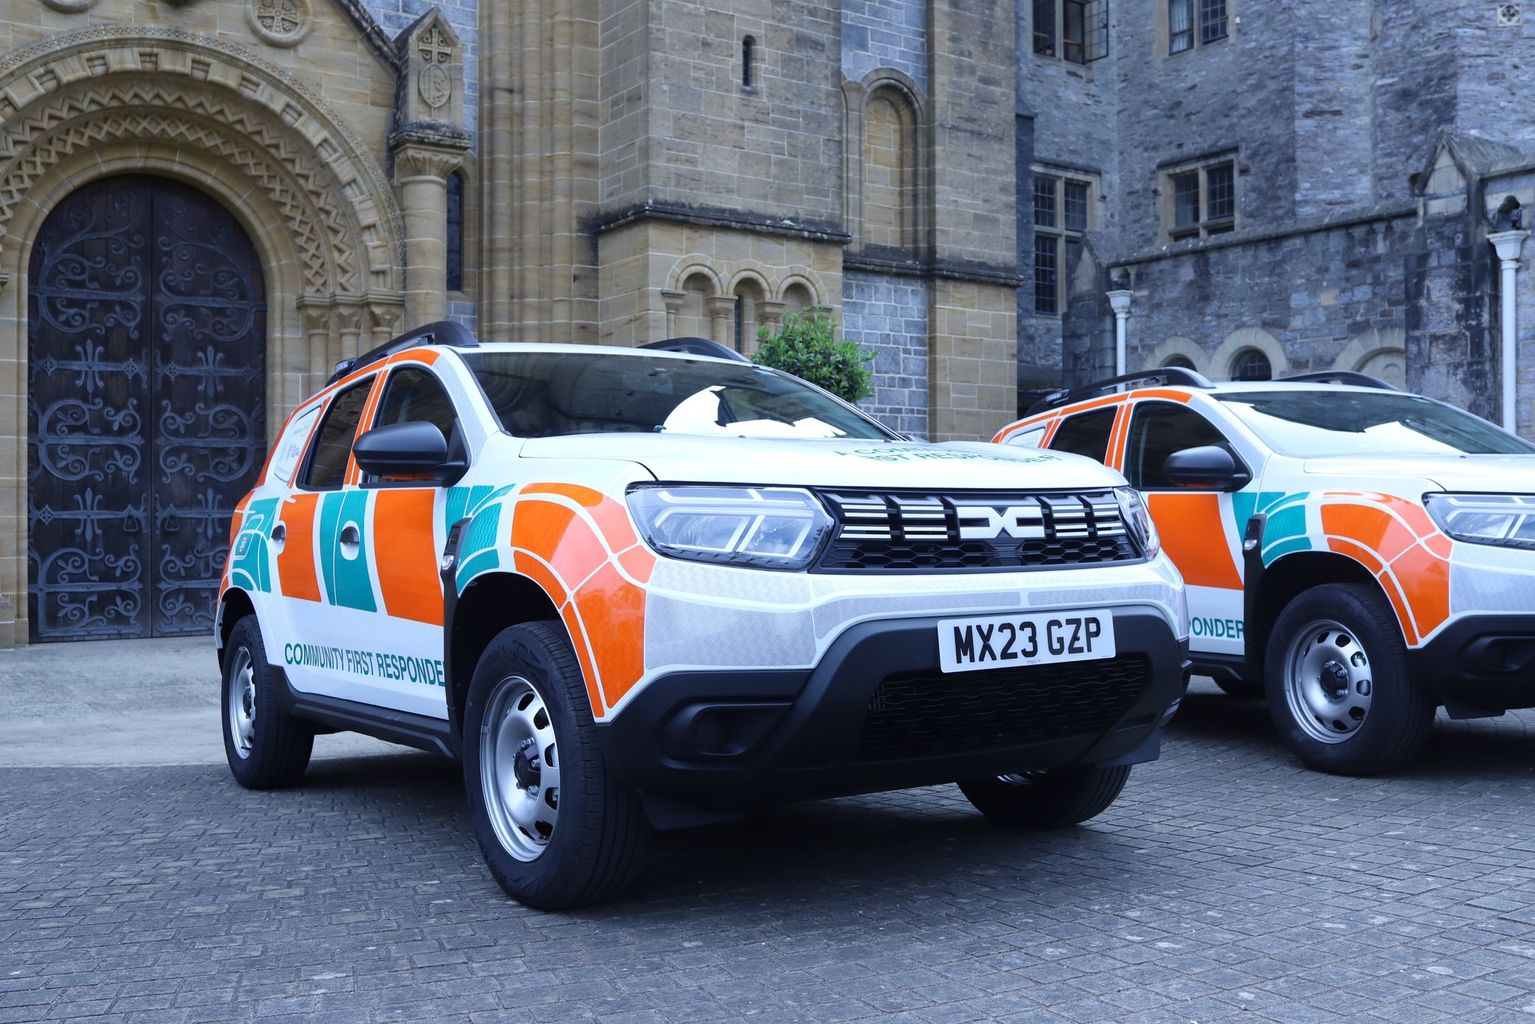 six-new-community-first-responder-cars-for-south-western-ambulance